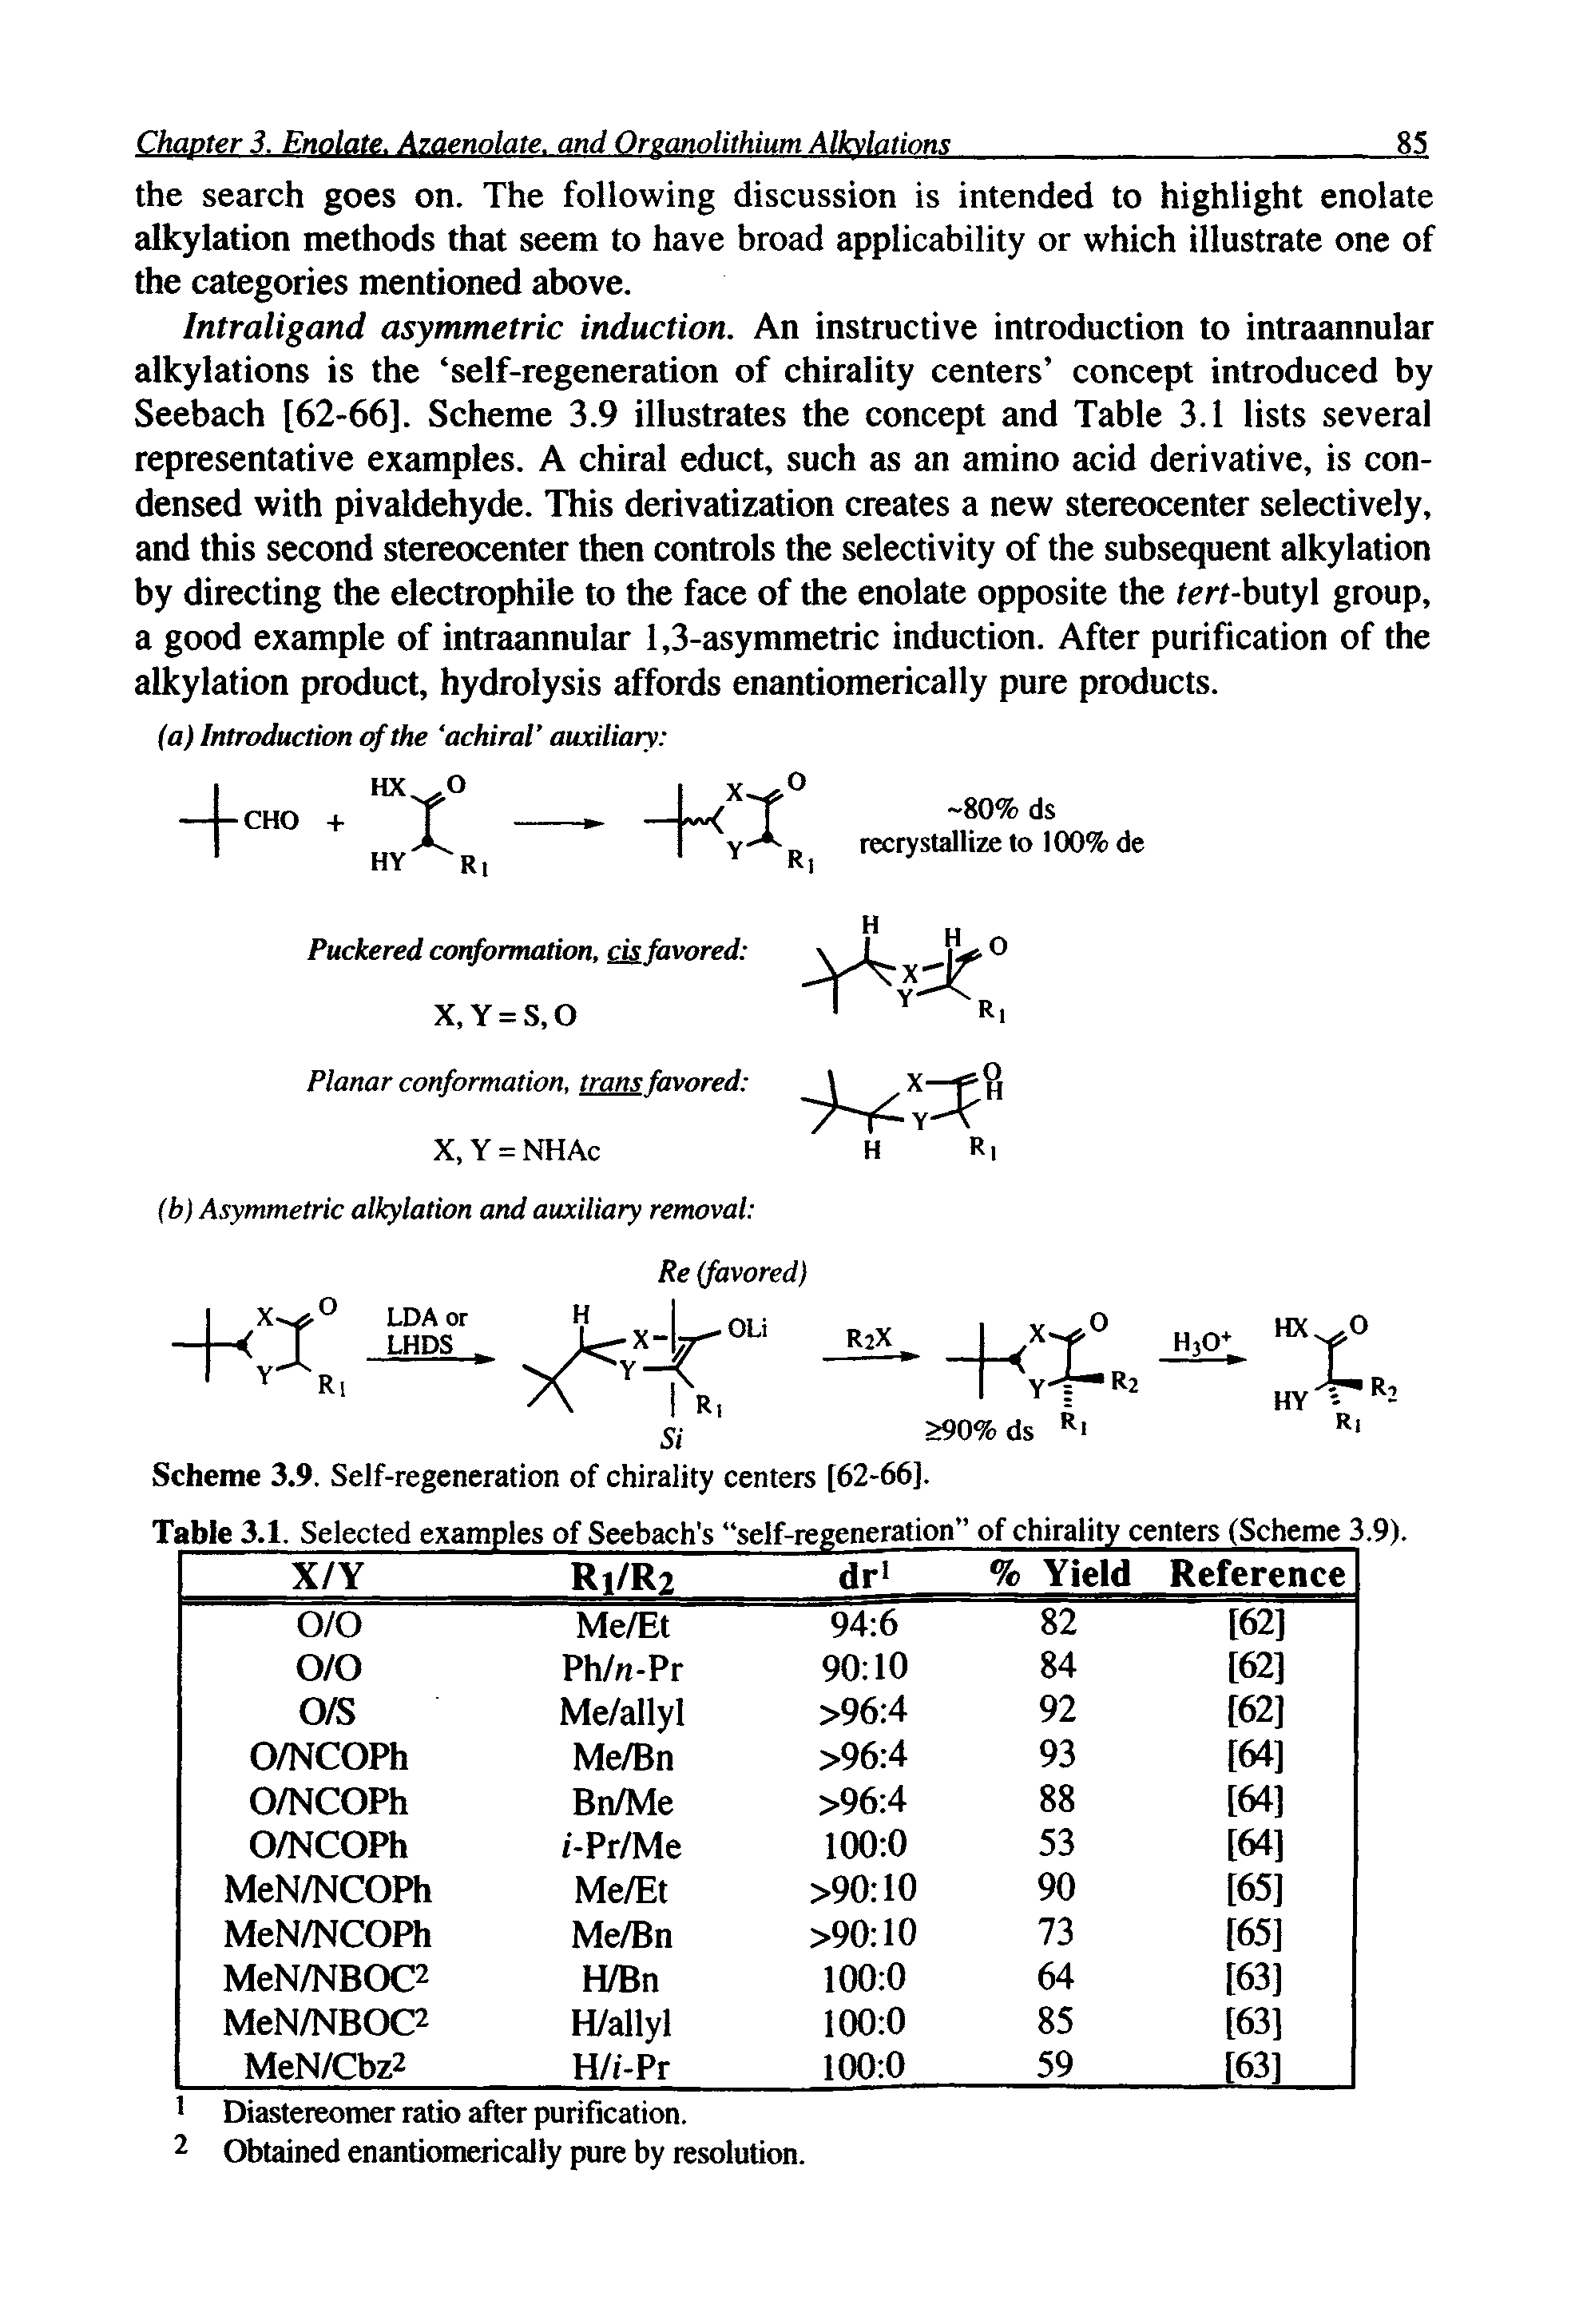 Table 3.1. Selected examples of Seebach s self-regeneration of chirality centers (Scheme 3.9)...